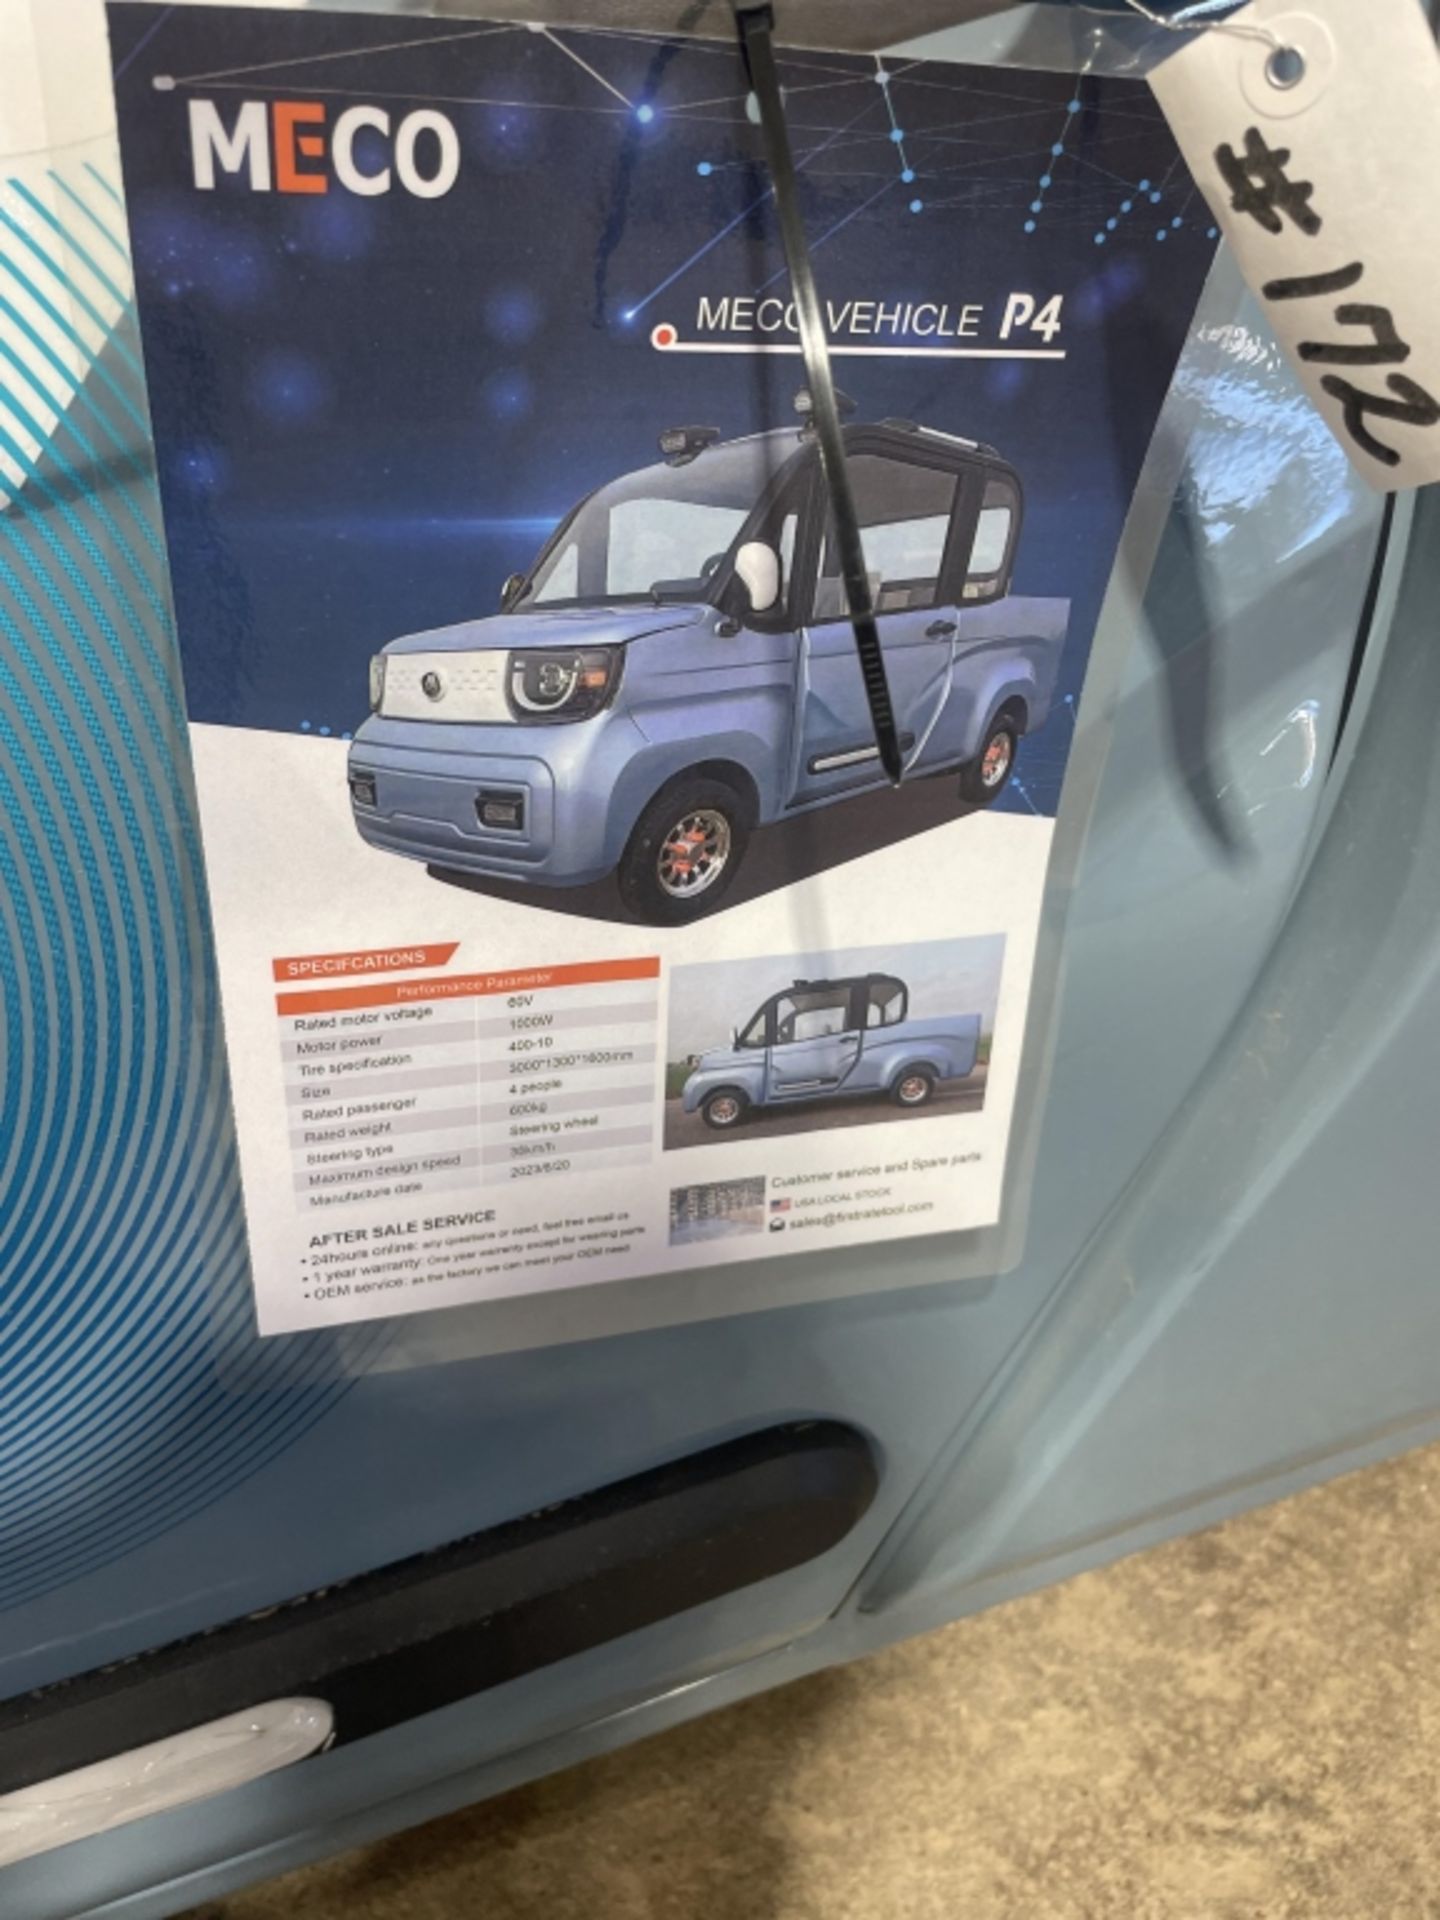 MECO P4 Electric Vehicle - Image 20 of 25